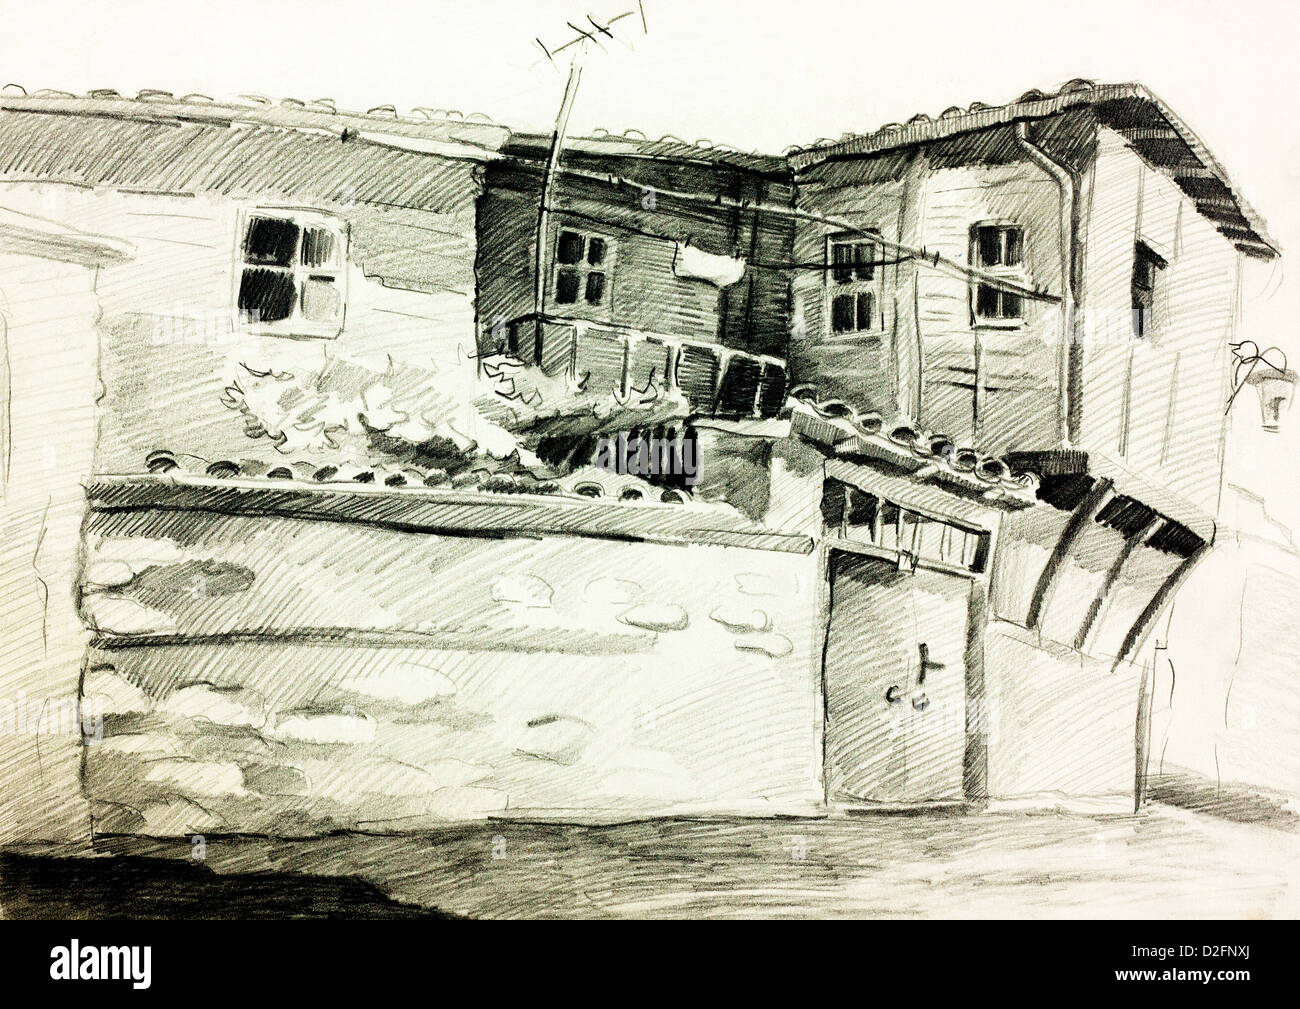 Himachal Pradesh- Watercolour sketches of Houses on Behance